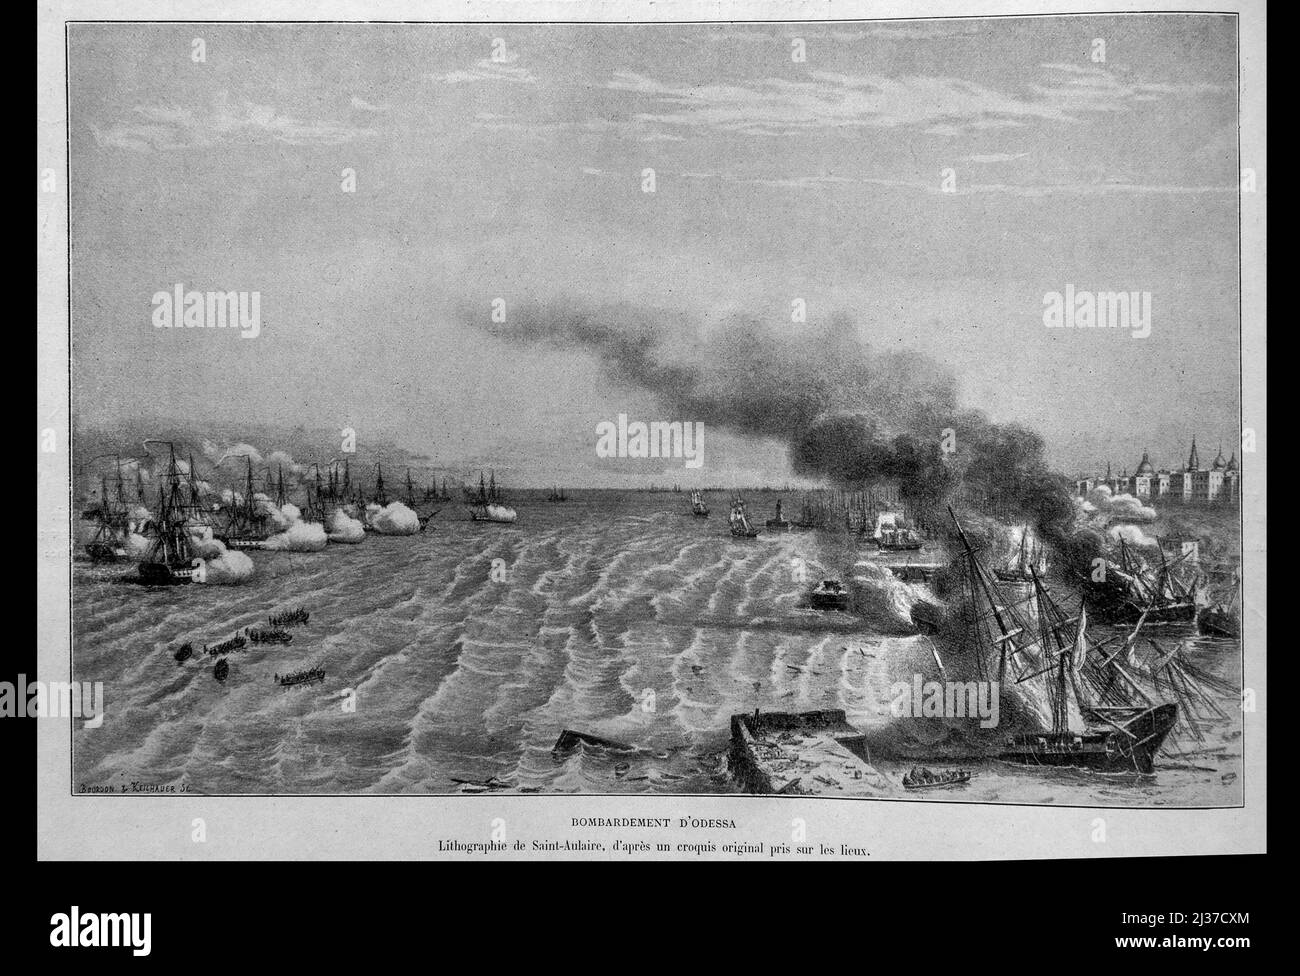 CRIMEAN WAR- Bombing Odessa...The Crimean War[e] was a military conflict fought from October 1853 to February 1856[9] in which Russia lost to an Stock Photo